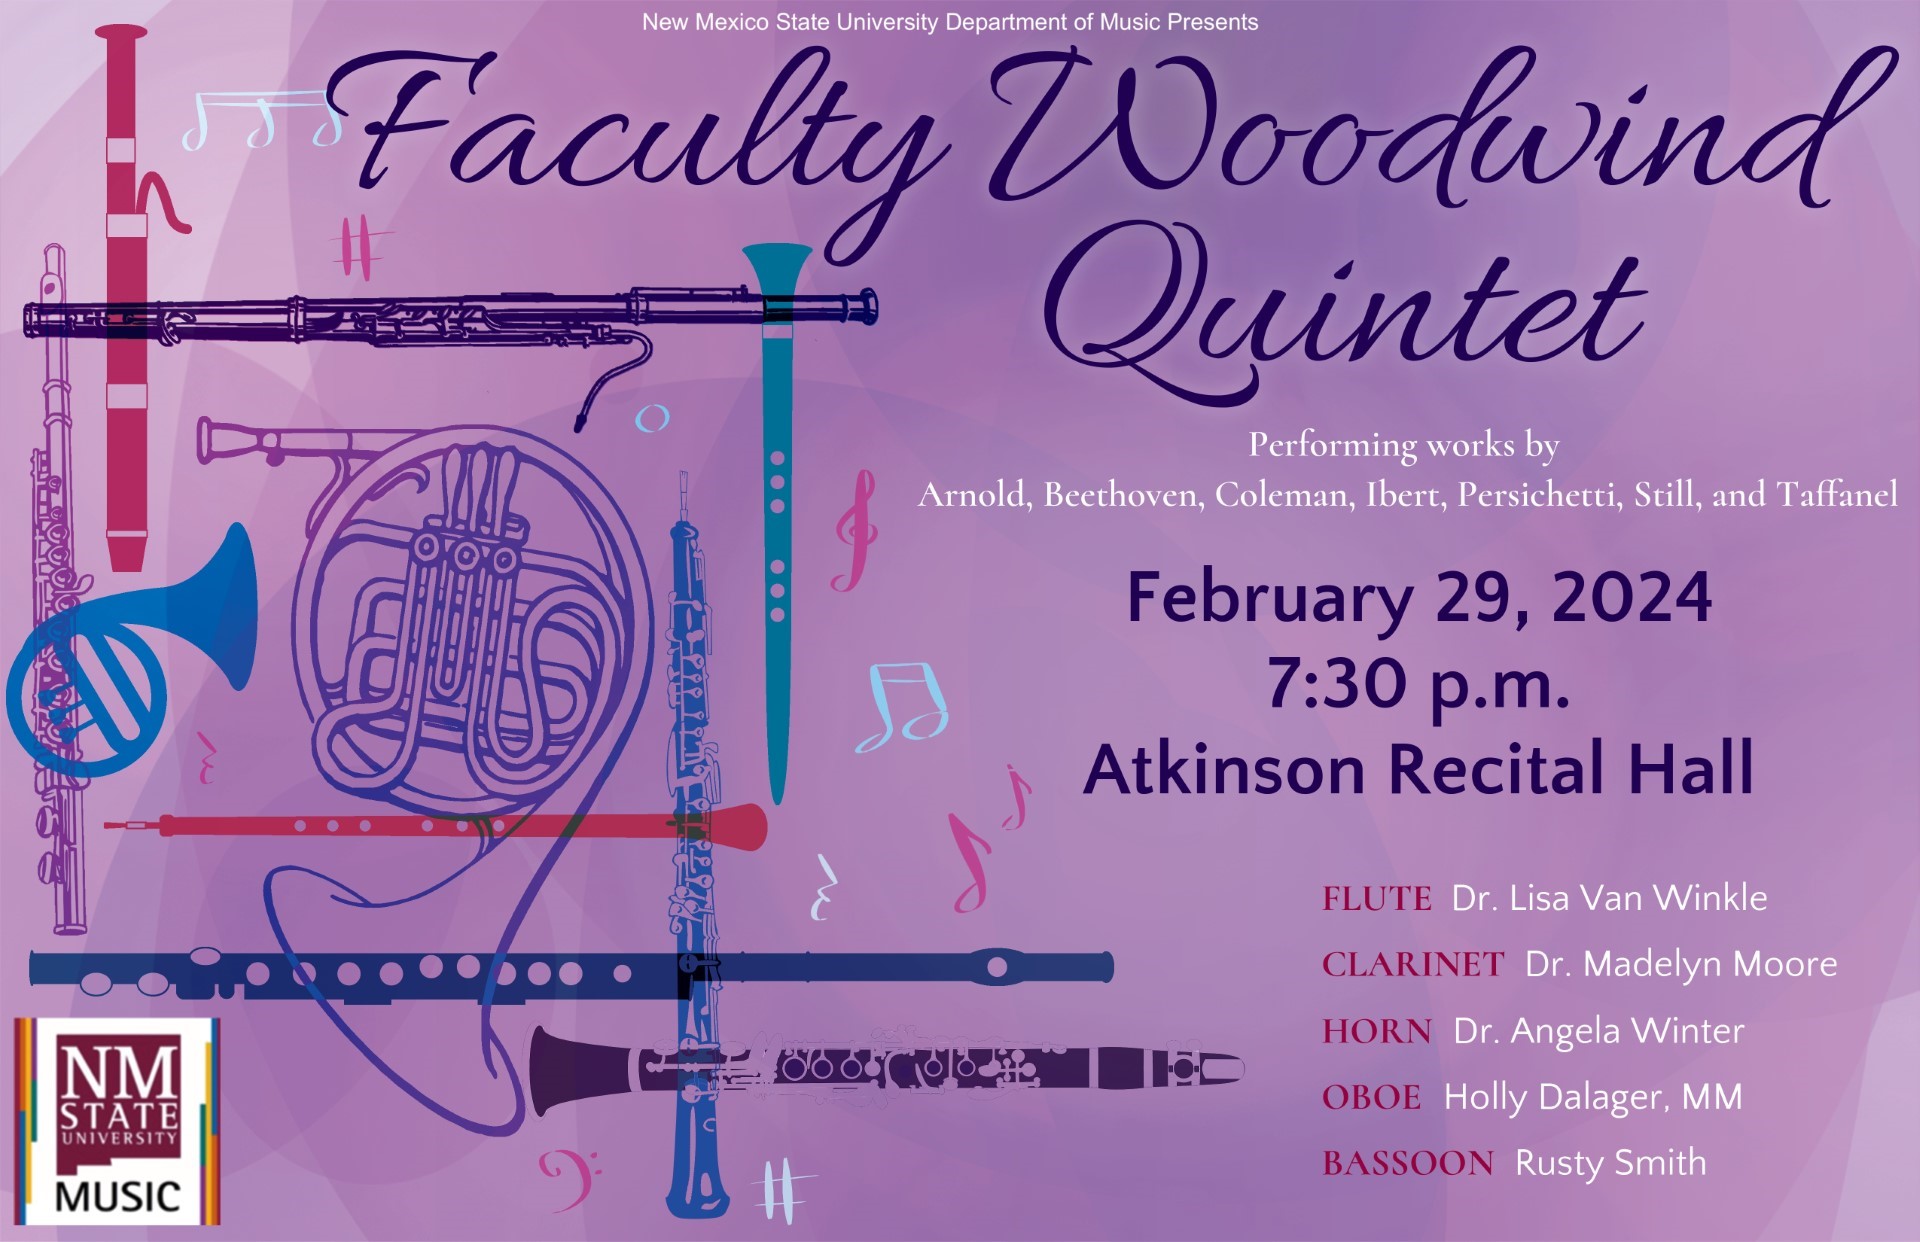 NMSU Music Presents Faculty Woodwind Quintet